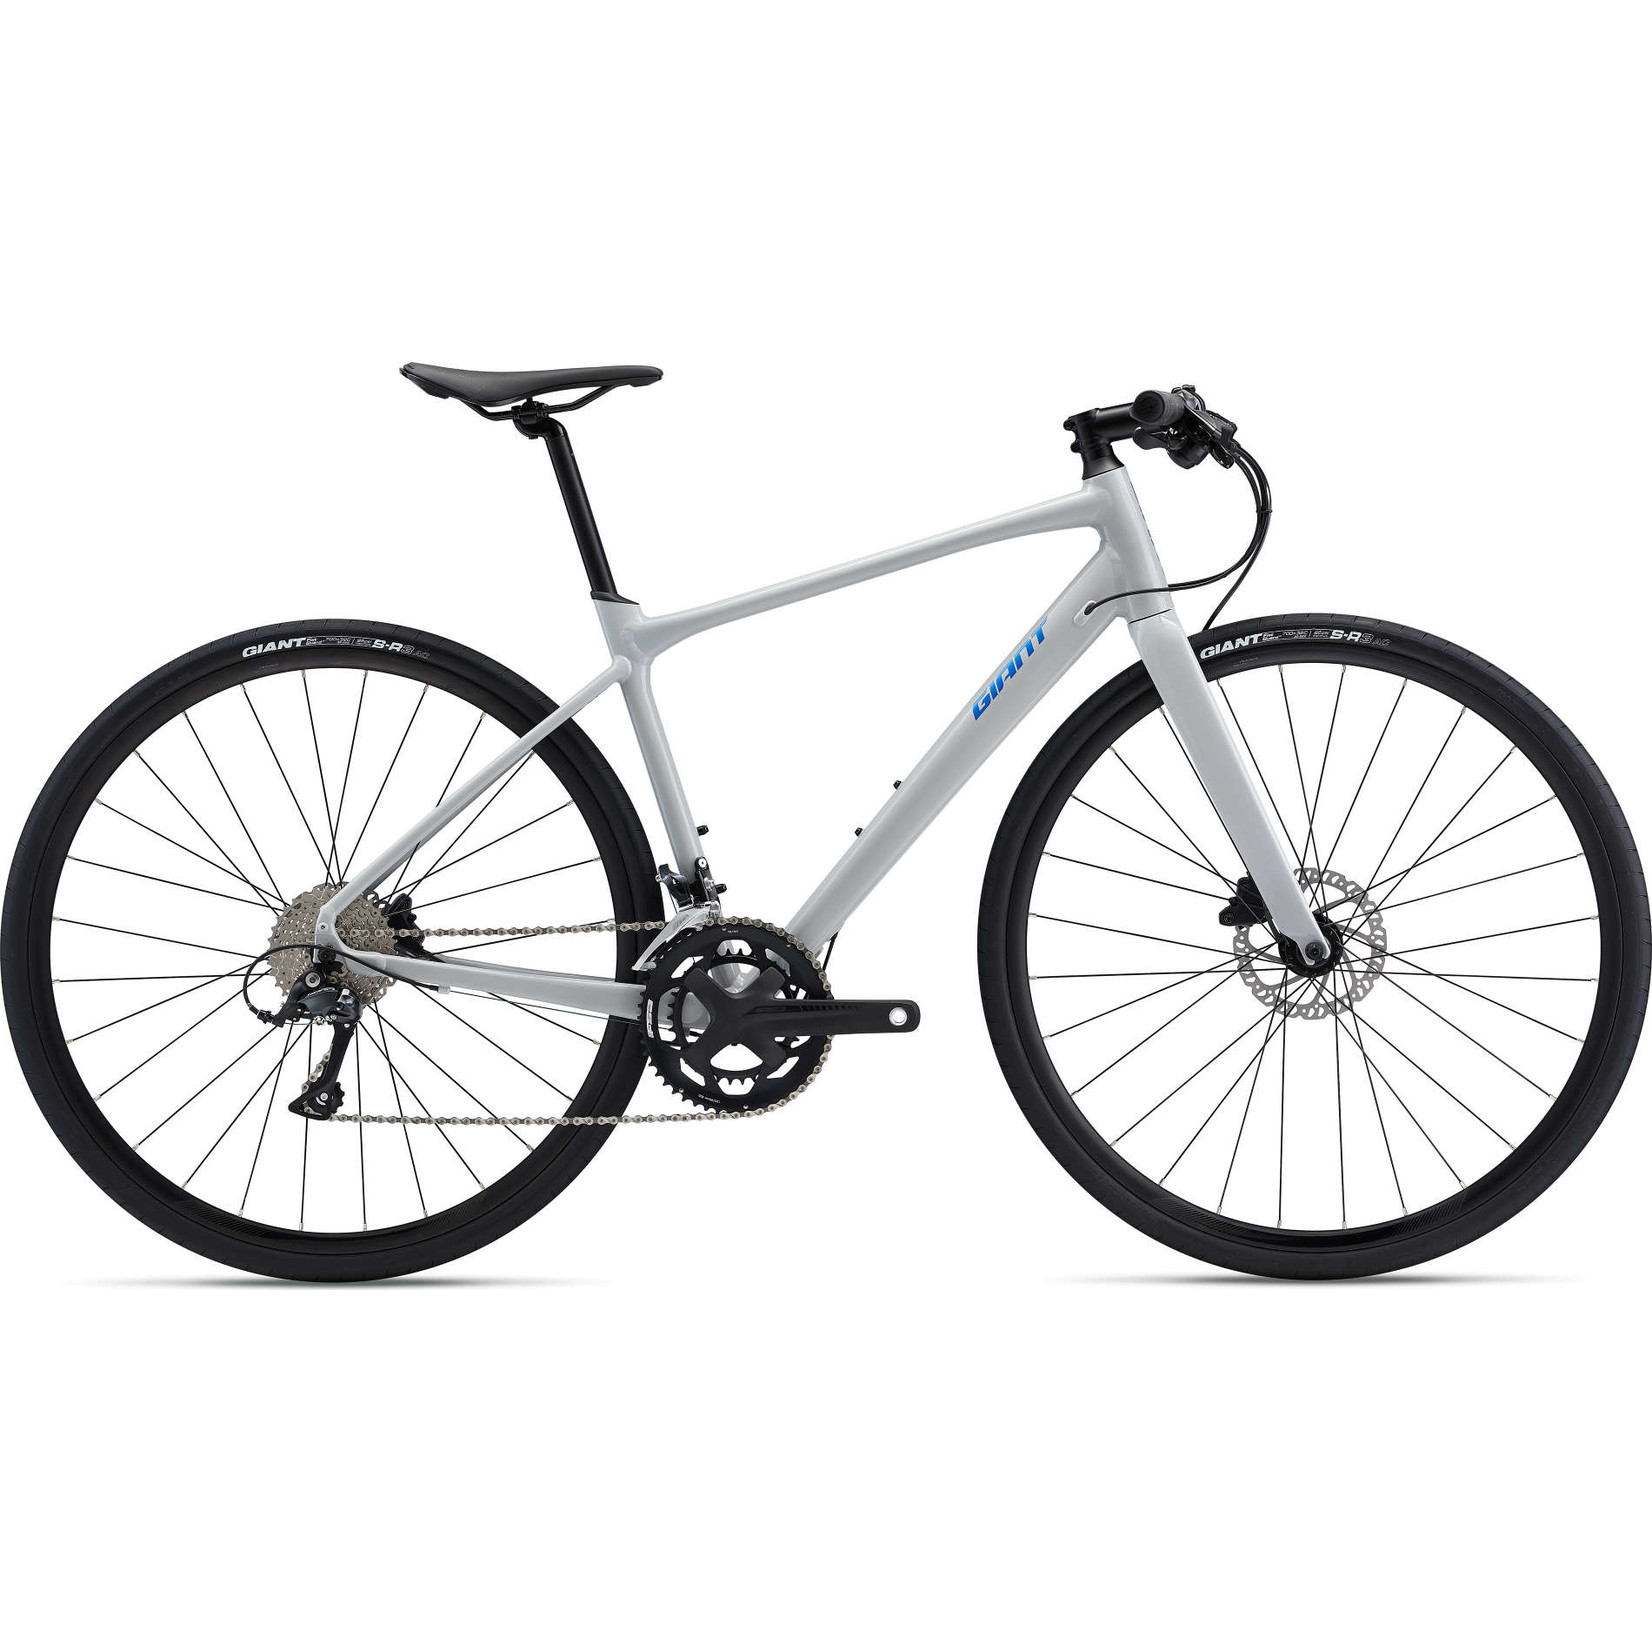 Giant Giant FastRoad SL 2 2022 Good Gray